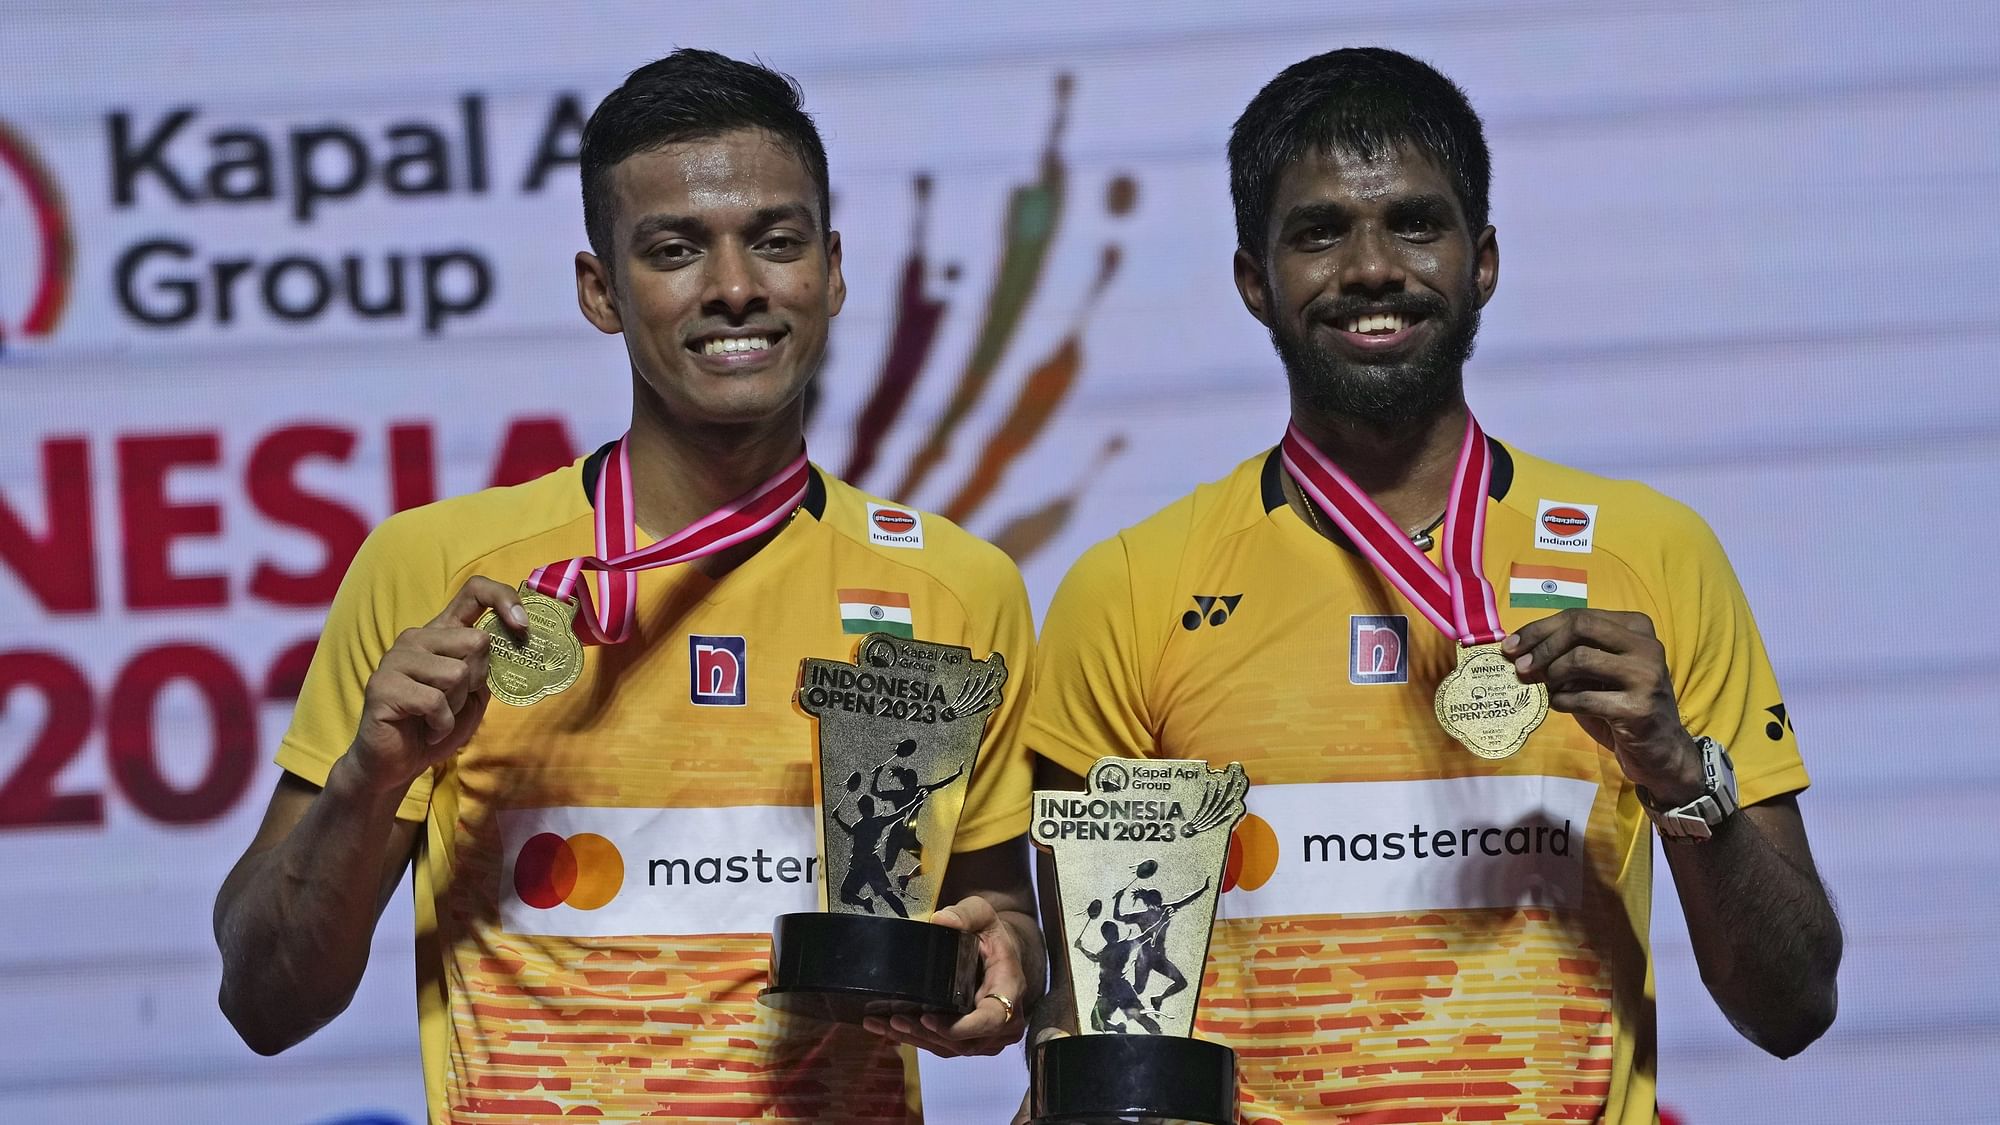 <div class="paragraphs"><p>Satwiksairaj Rankireddy and Chirag Shetty beat the reigning world champions to win the Indonesia Open title on Sunday.</p></div>